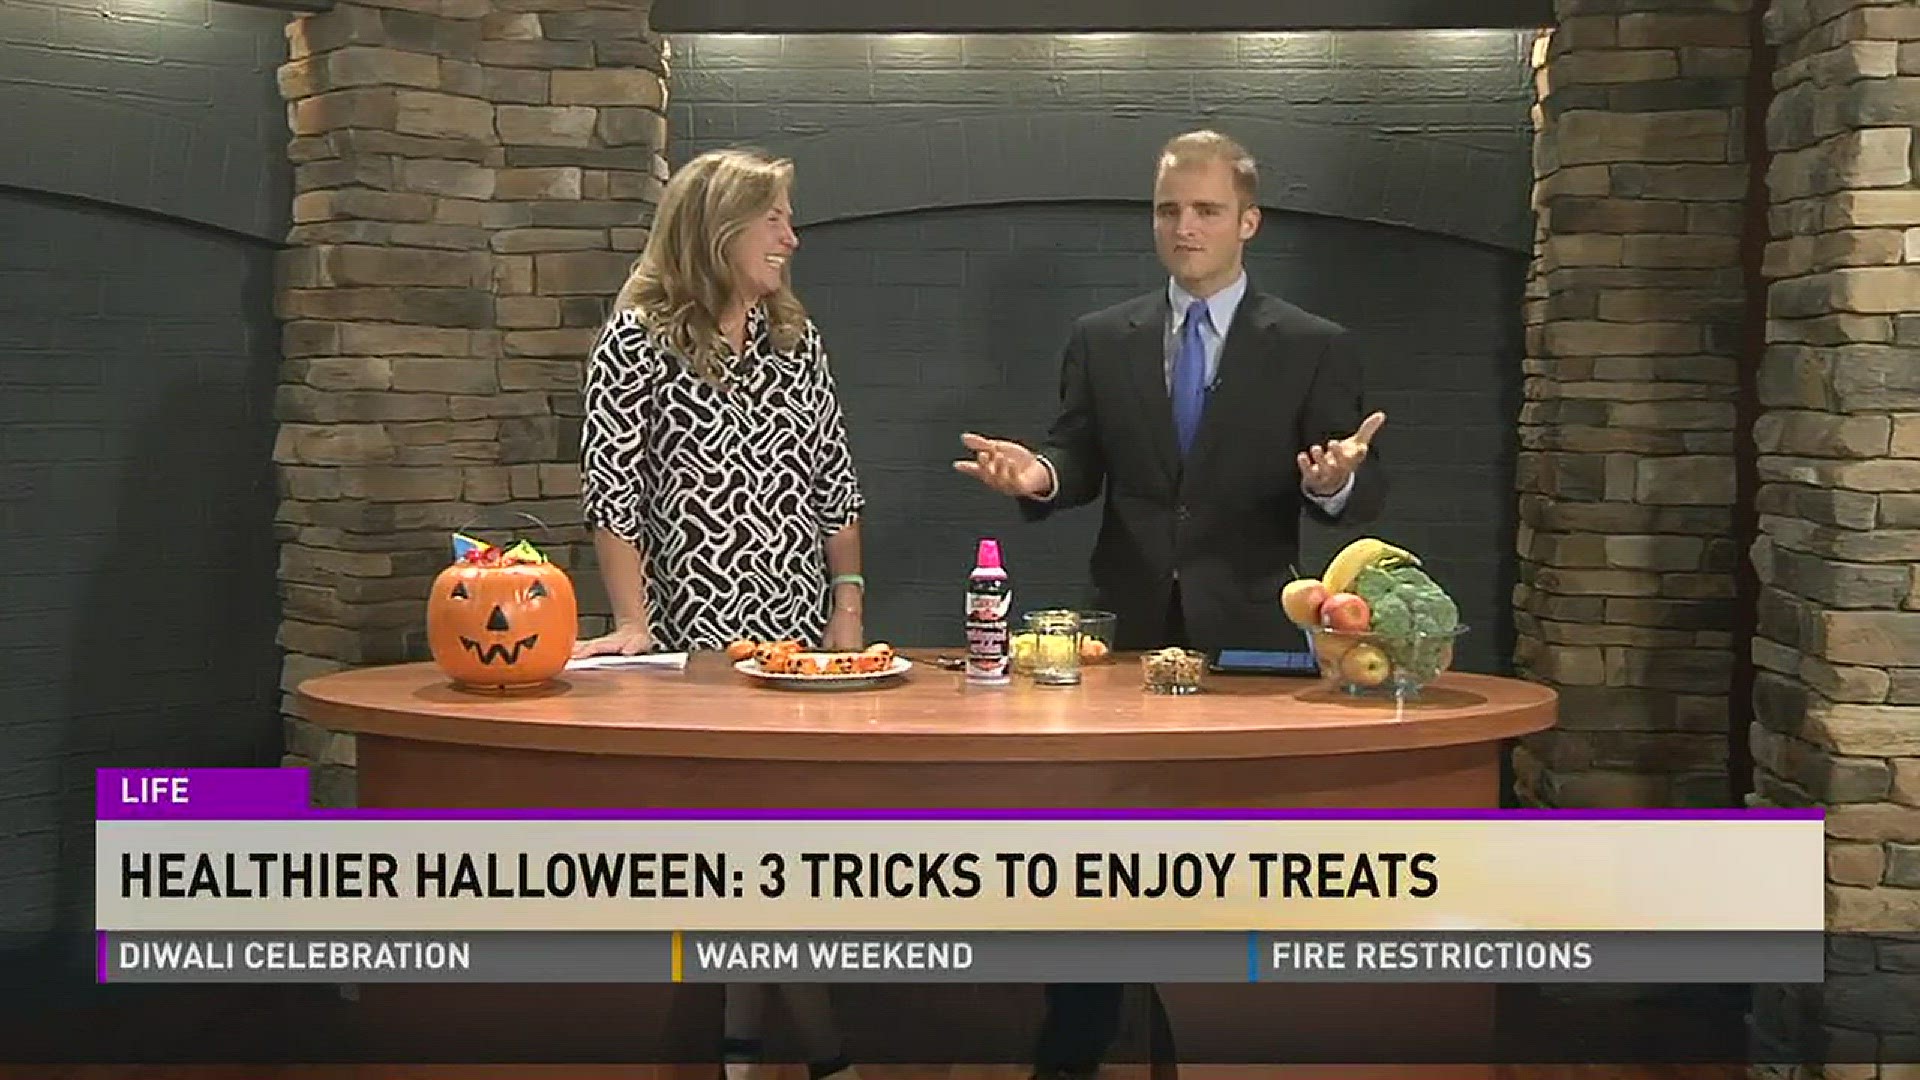 Local dietition talks about 3 tricks to enjoy Halloween treats.